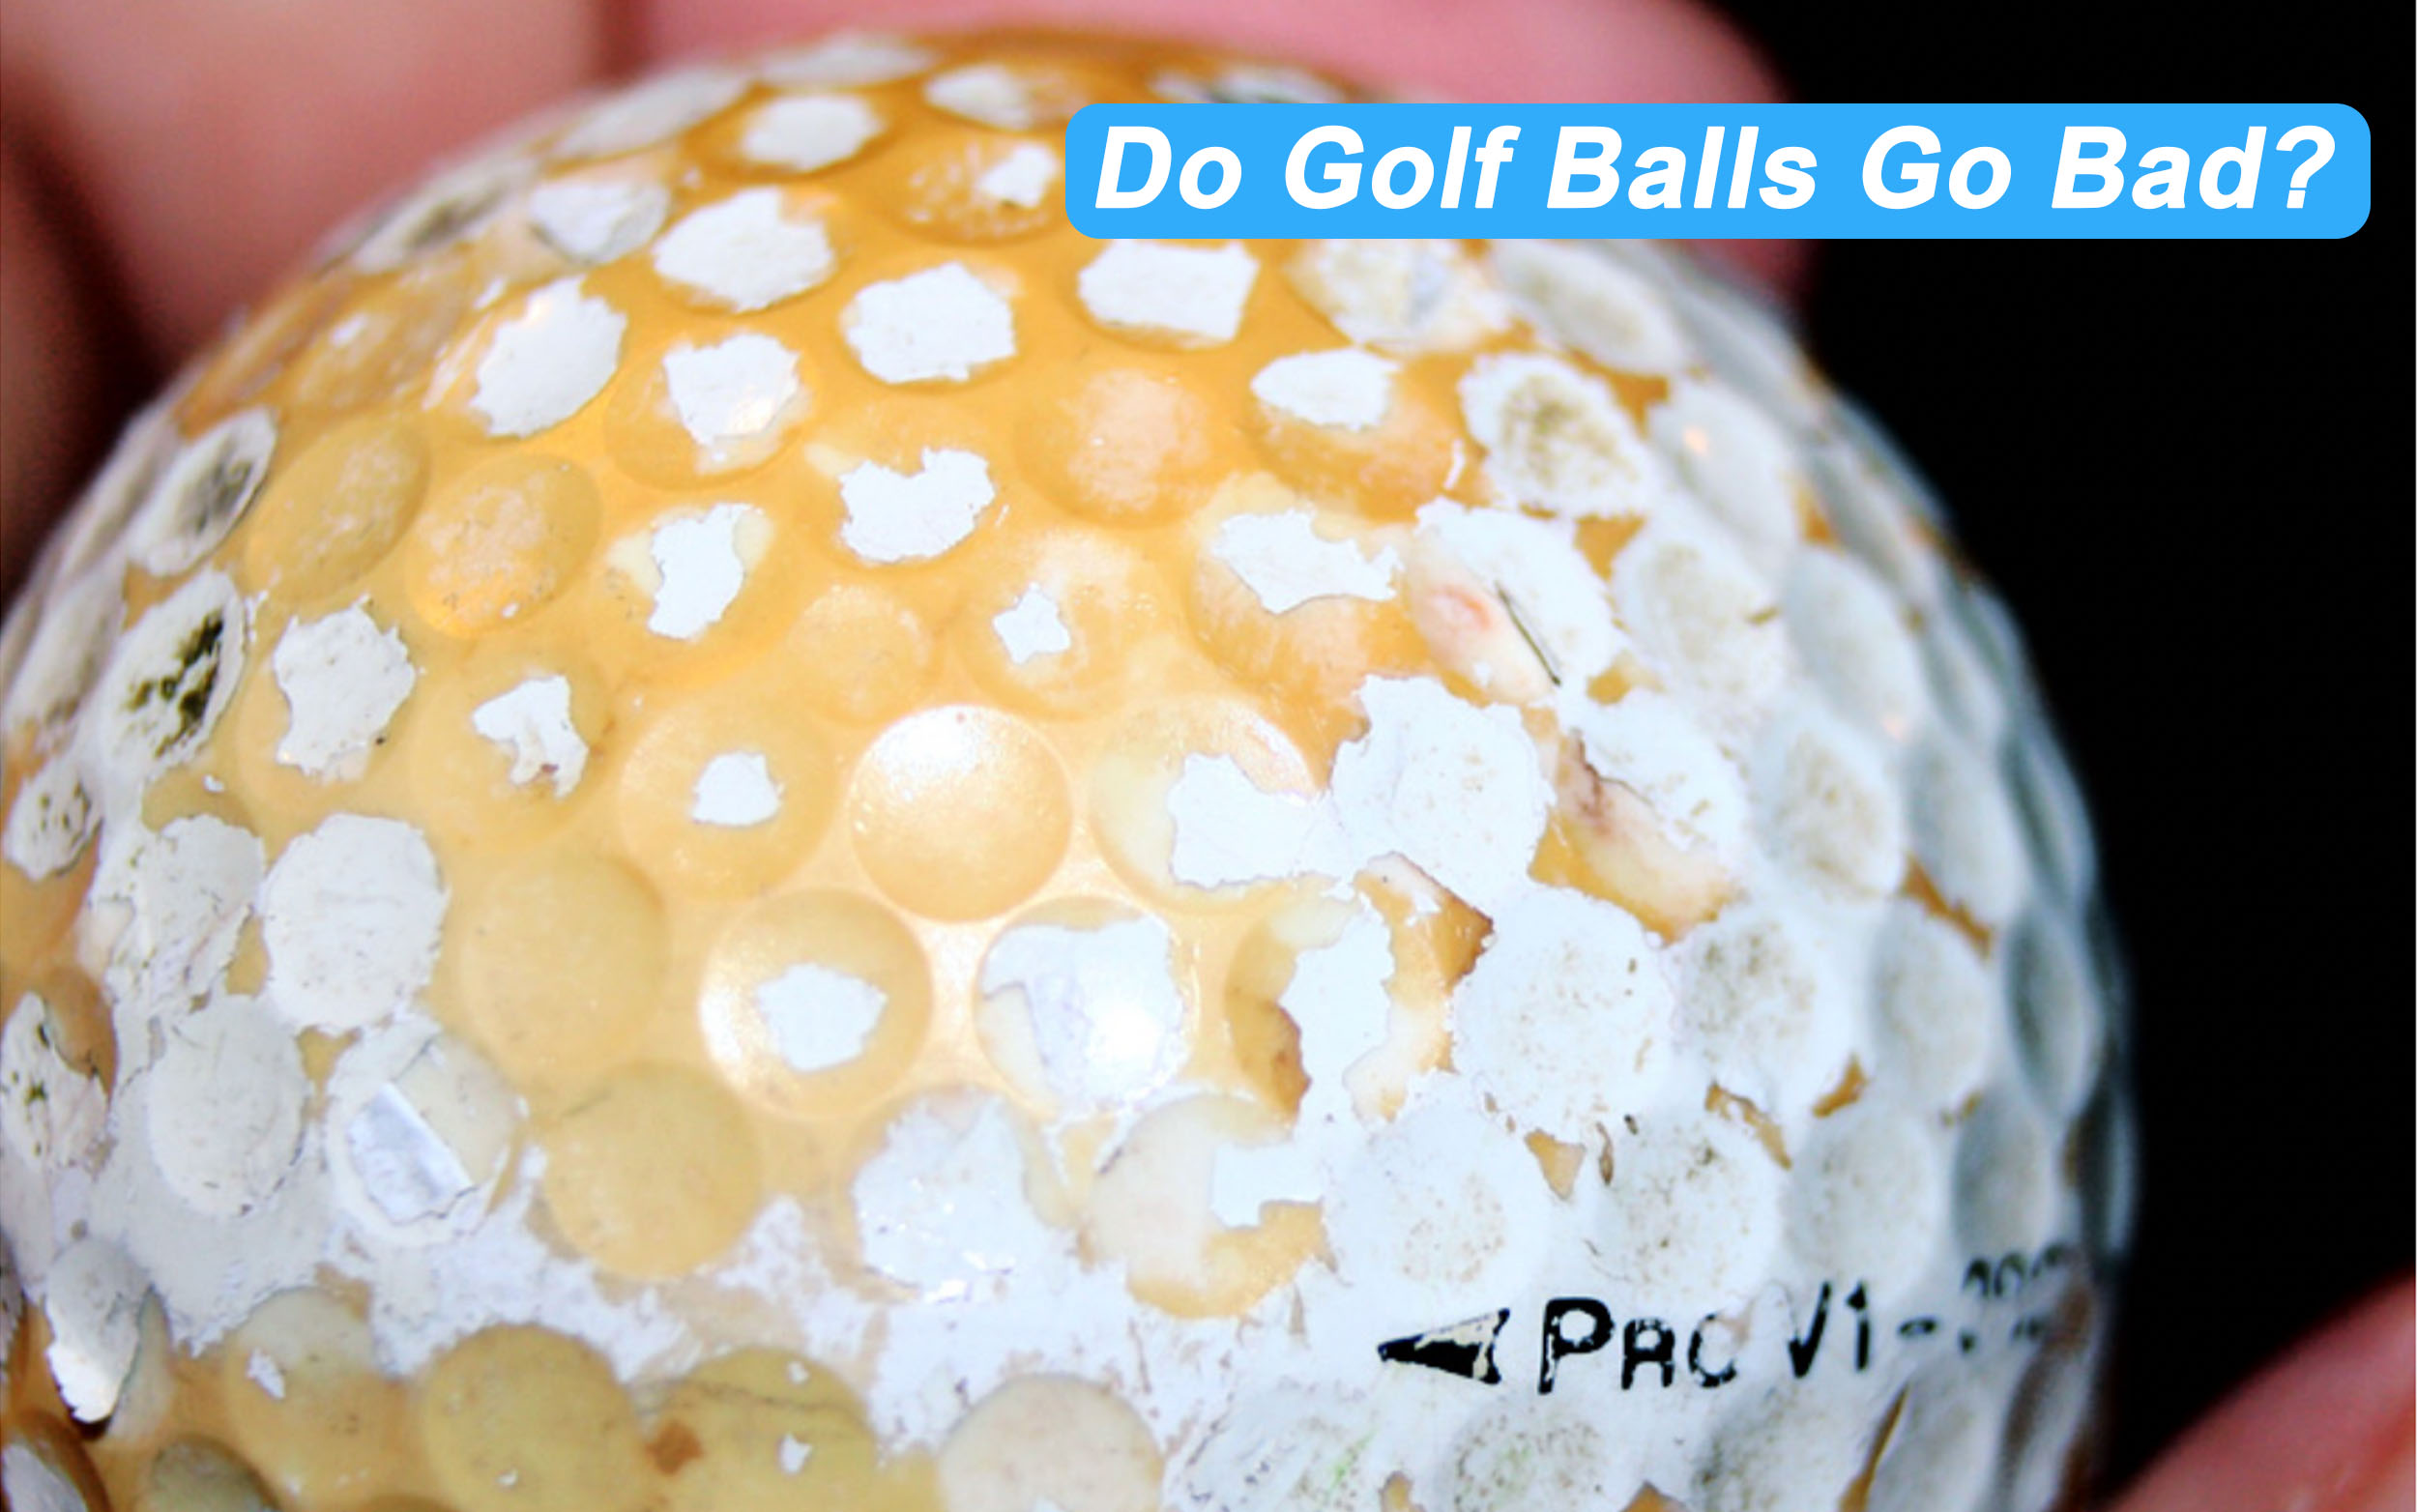 A golf ball that has gone bad